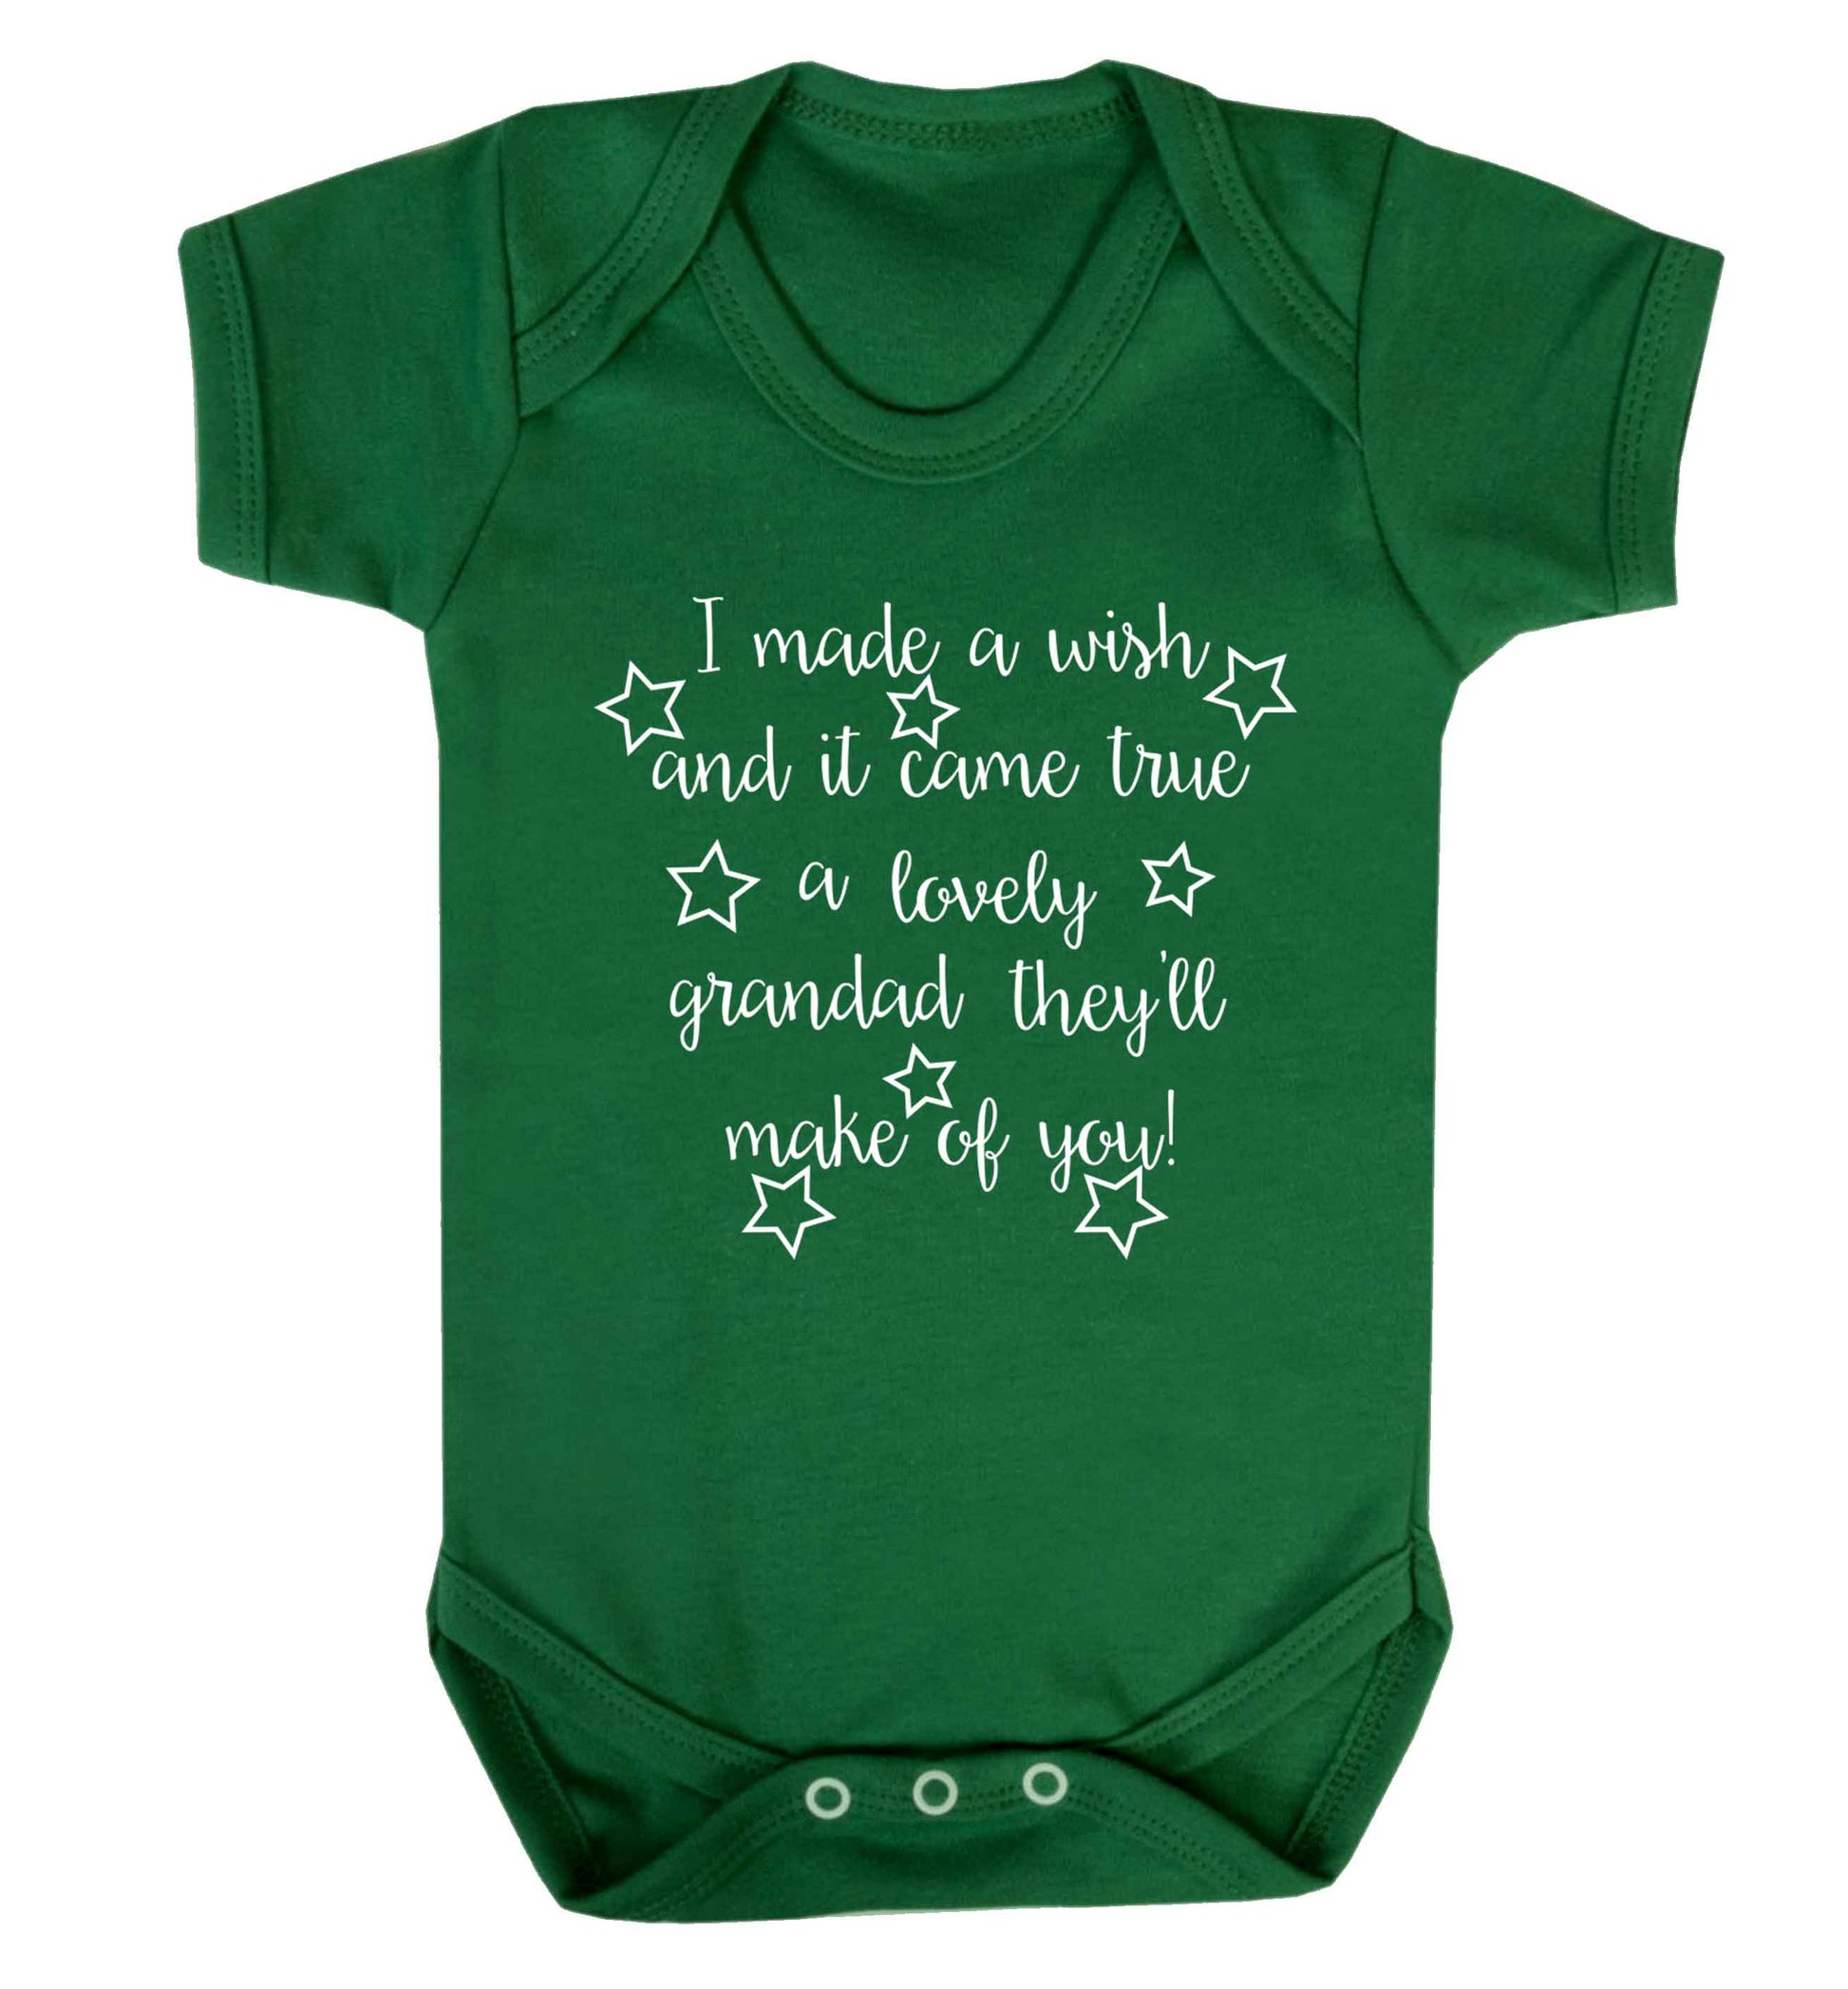 I made a wish and it came true a lovely grandad they'll make of you! Baby Vest green 18-24 months